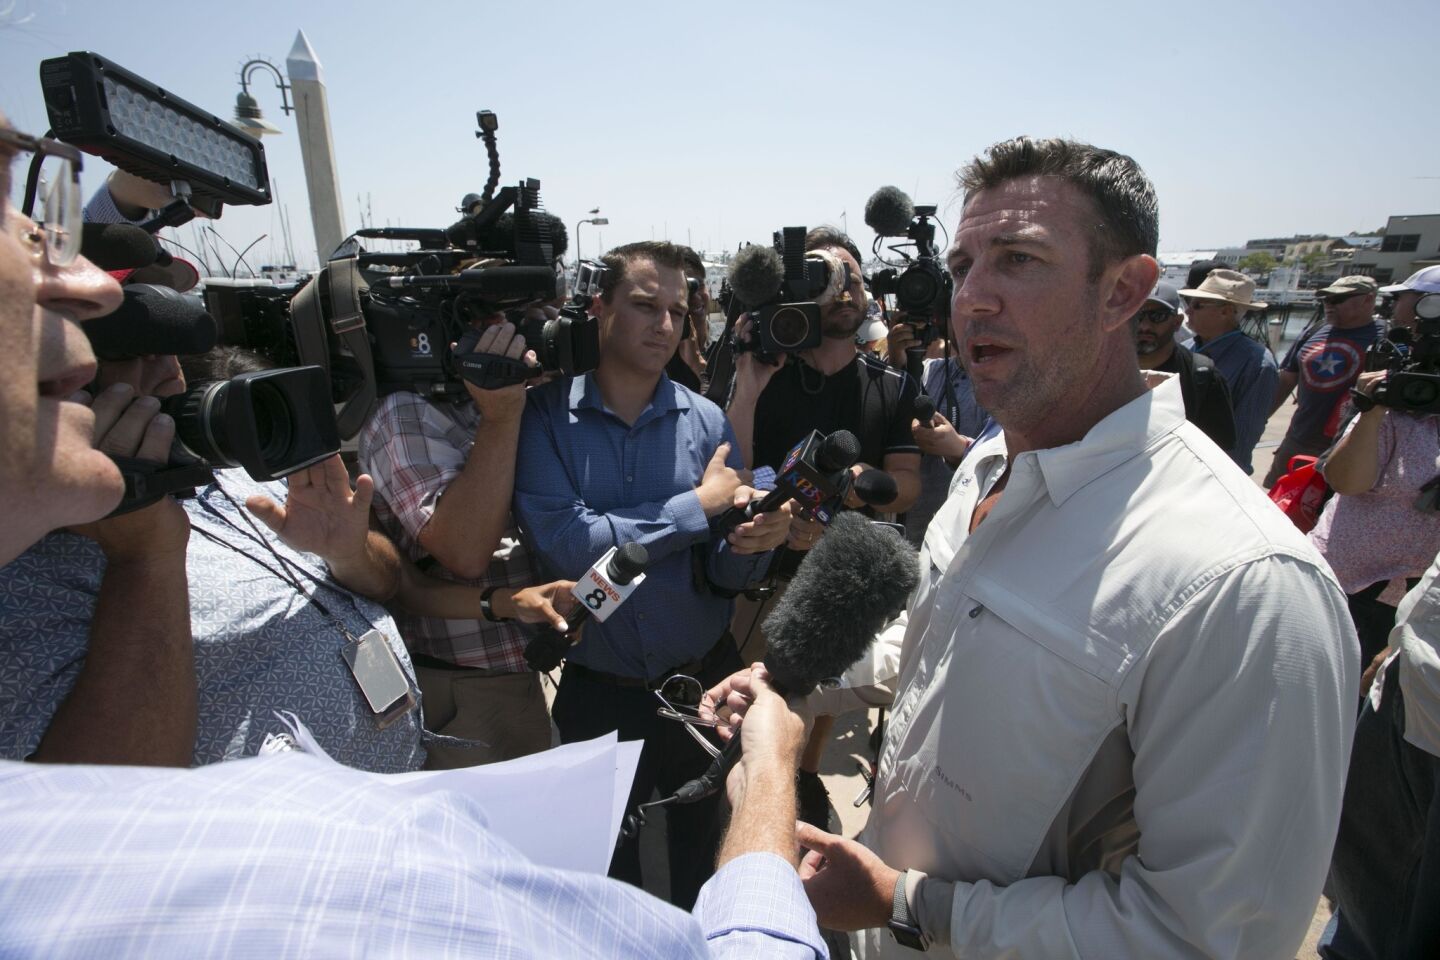 Congressman Duncan D. Hunter, who was indicted yesterday on campaign finance violations addressed questions from the media after returning from a Rivers of Recovery Fishing Tournament for Wounded Combat Veterans fundraiser in San Diego.